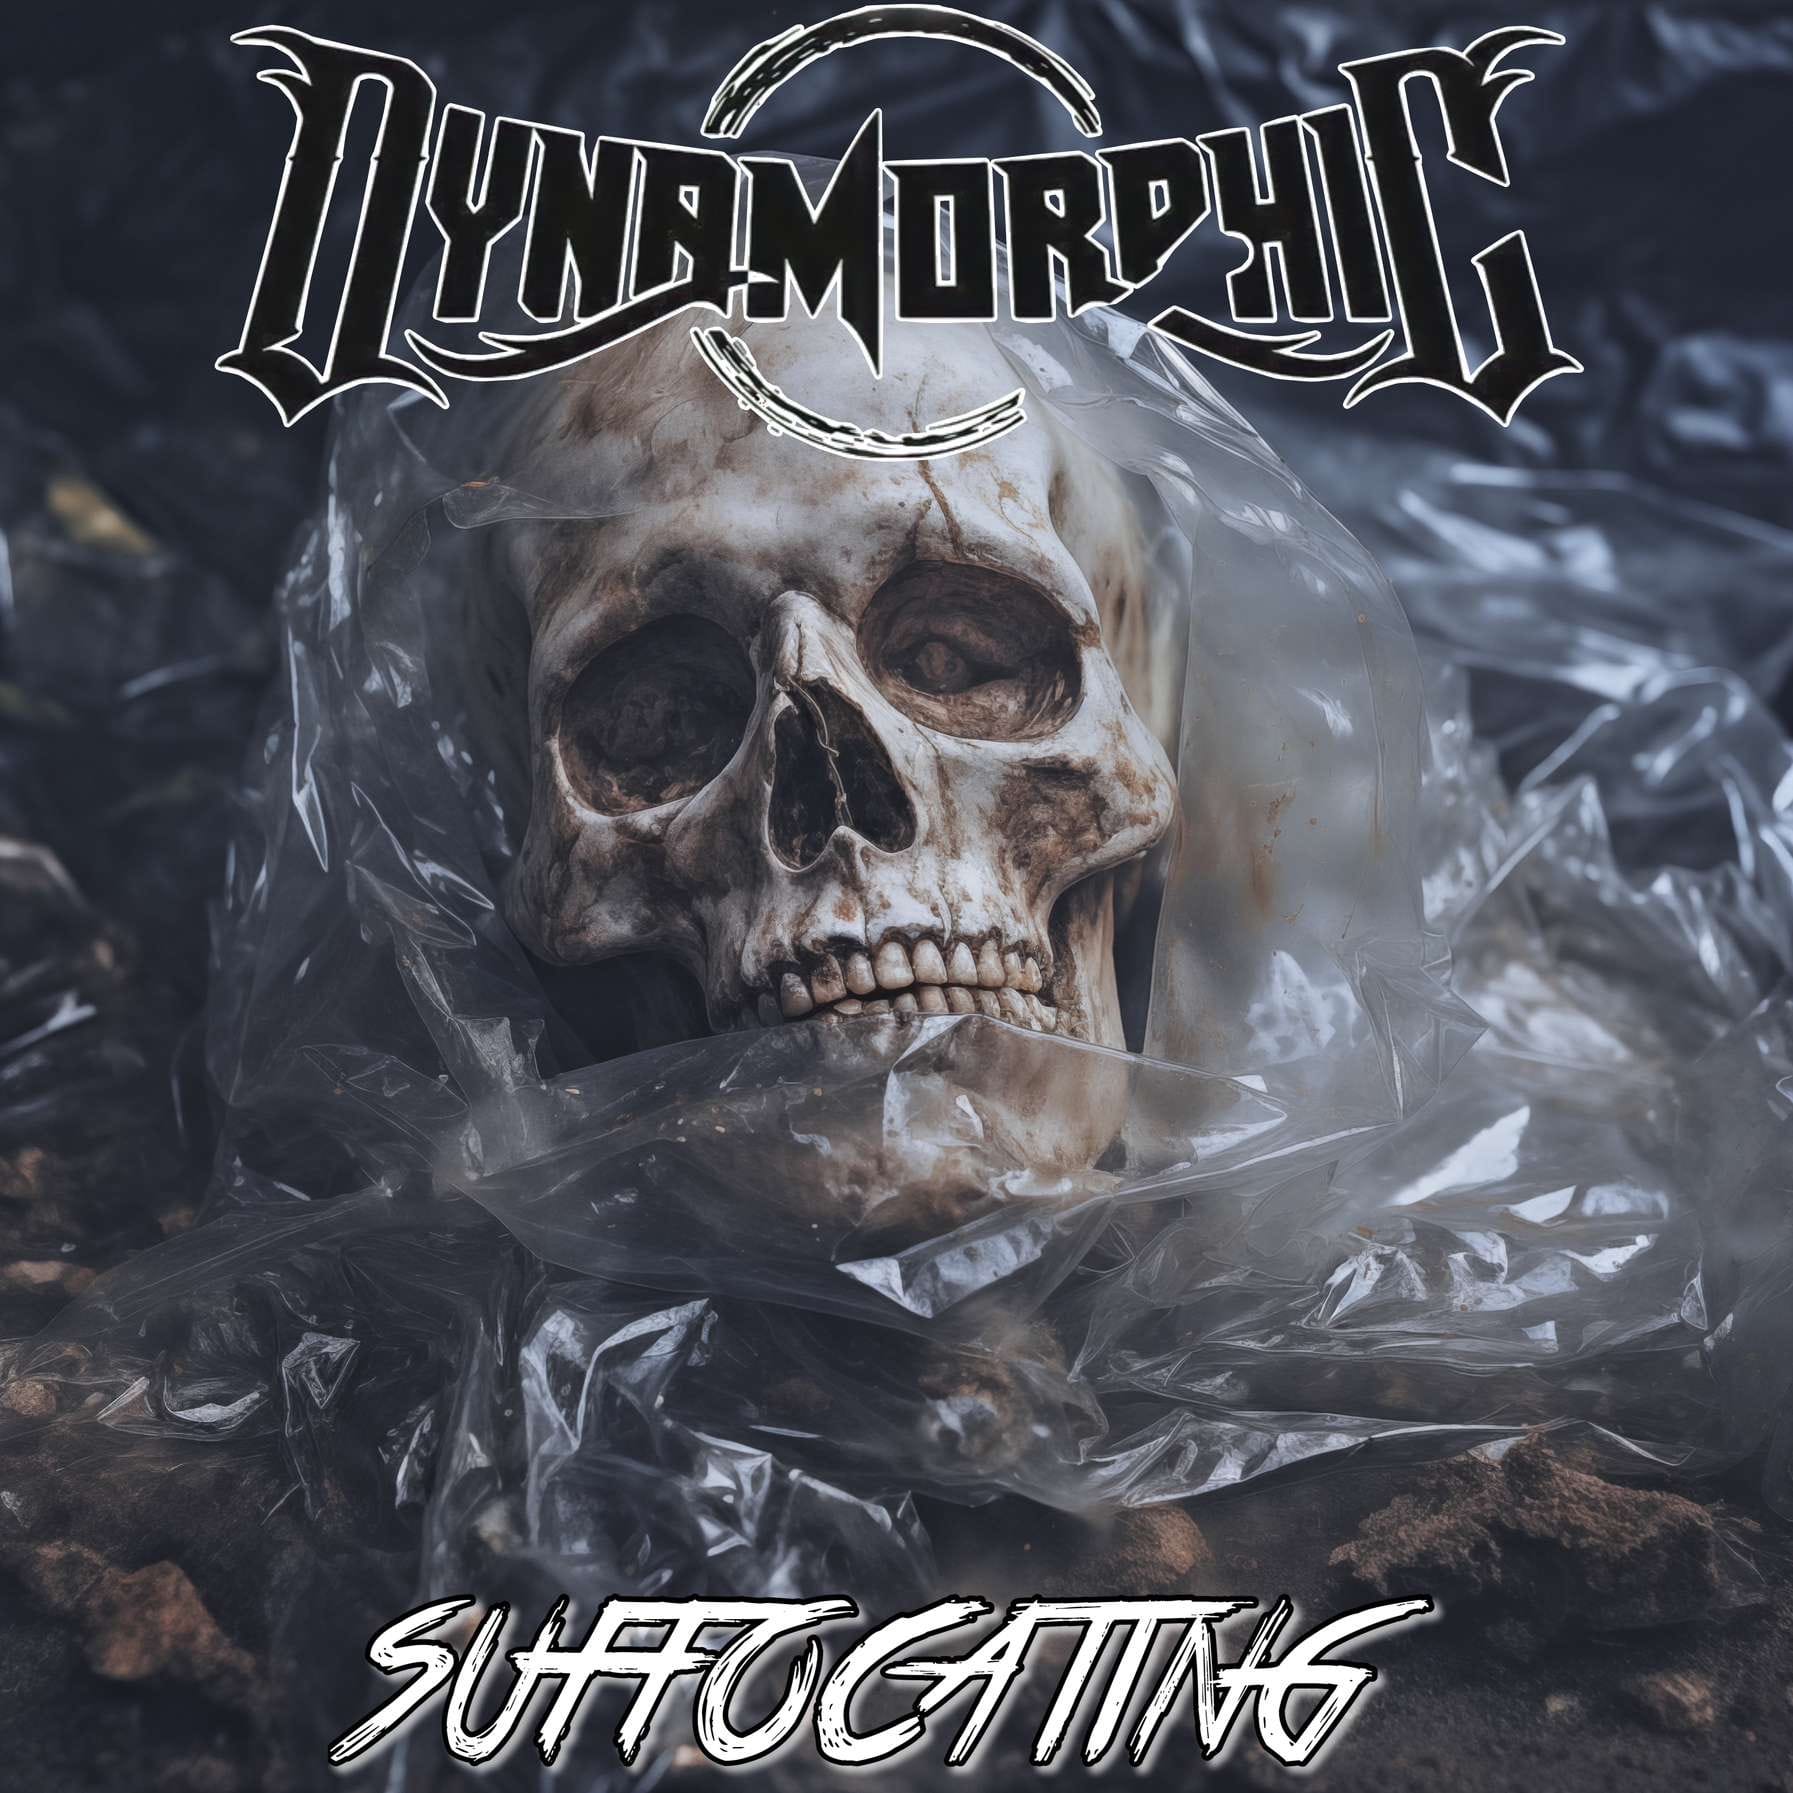 Song Review | Suffocating | Dynamorphic